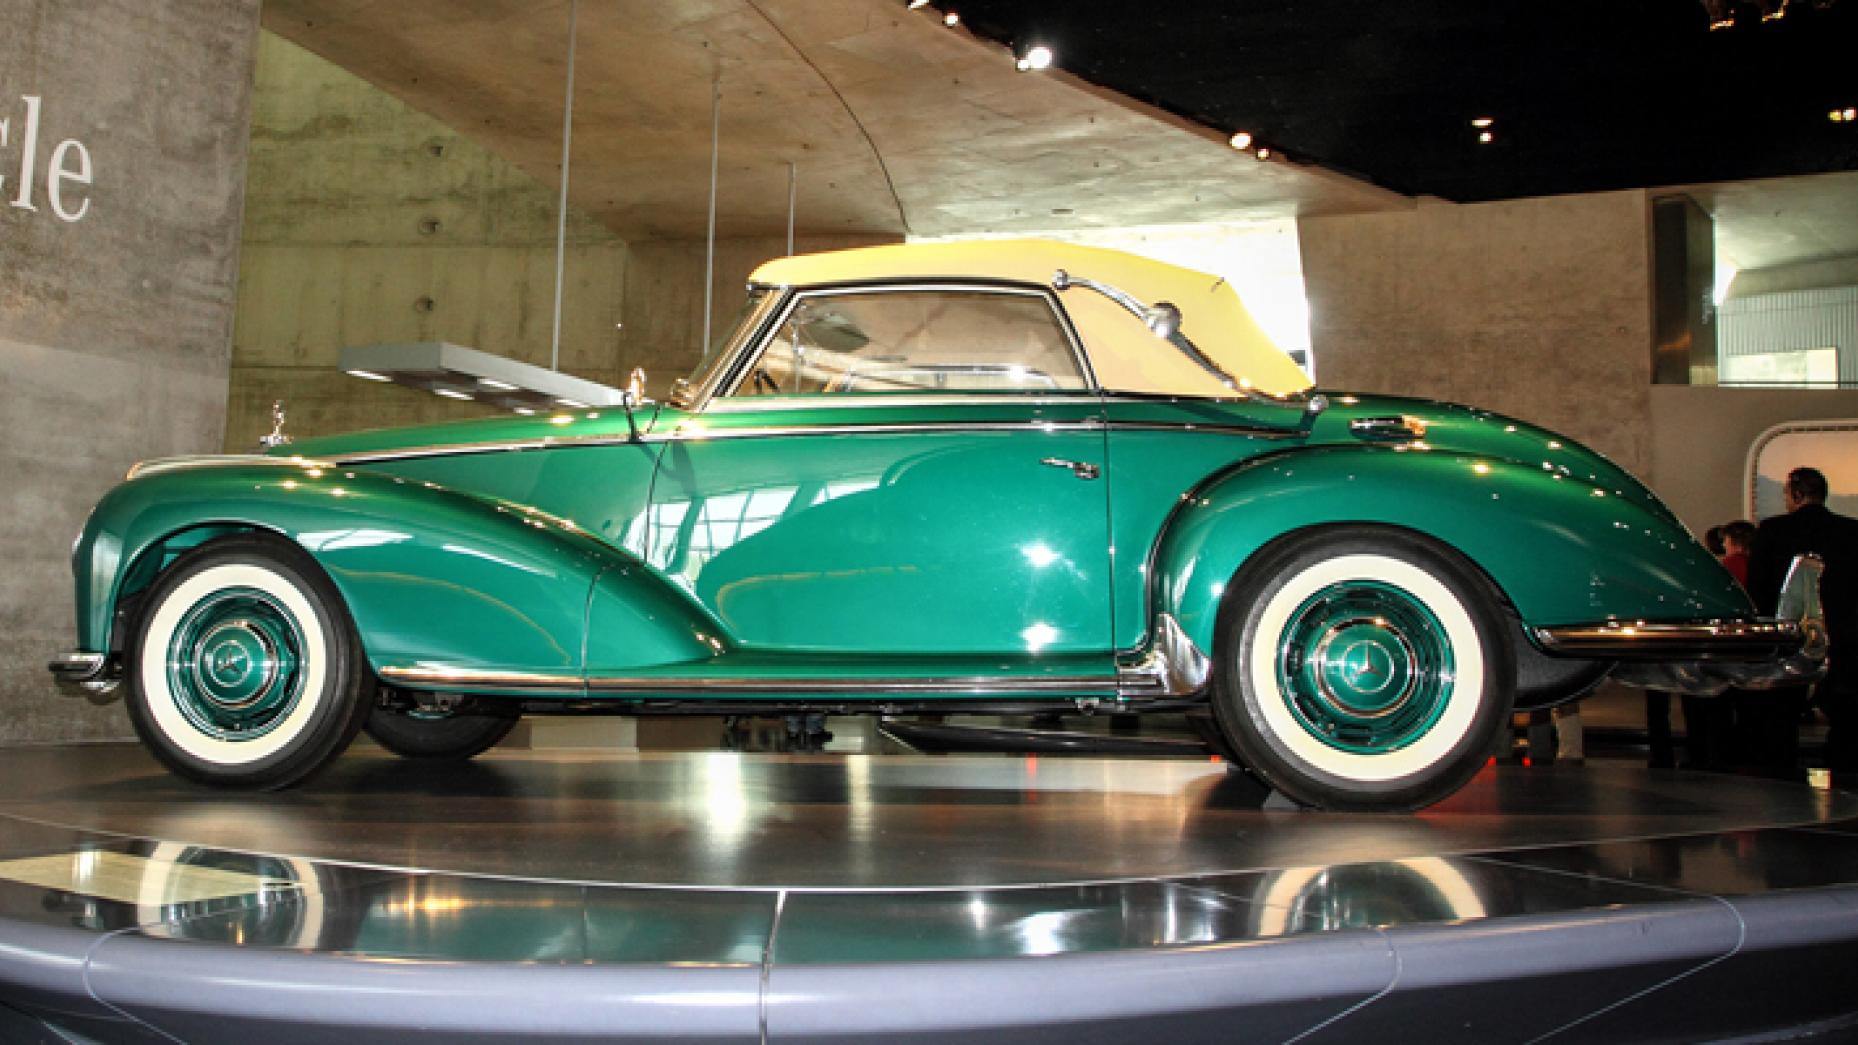 1954 MERCEDES-BENZ 300S CABRIOLET: Basically, a drop-top, two-door version of the big 300. Produced 147hp from its 3.0-litre six, and hit a top speed of 174km/h. In utter class.